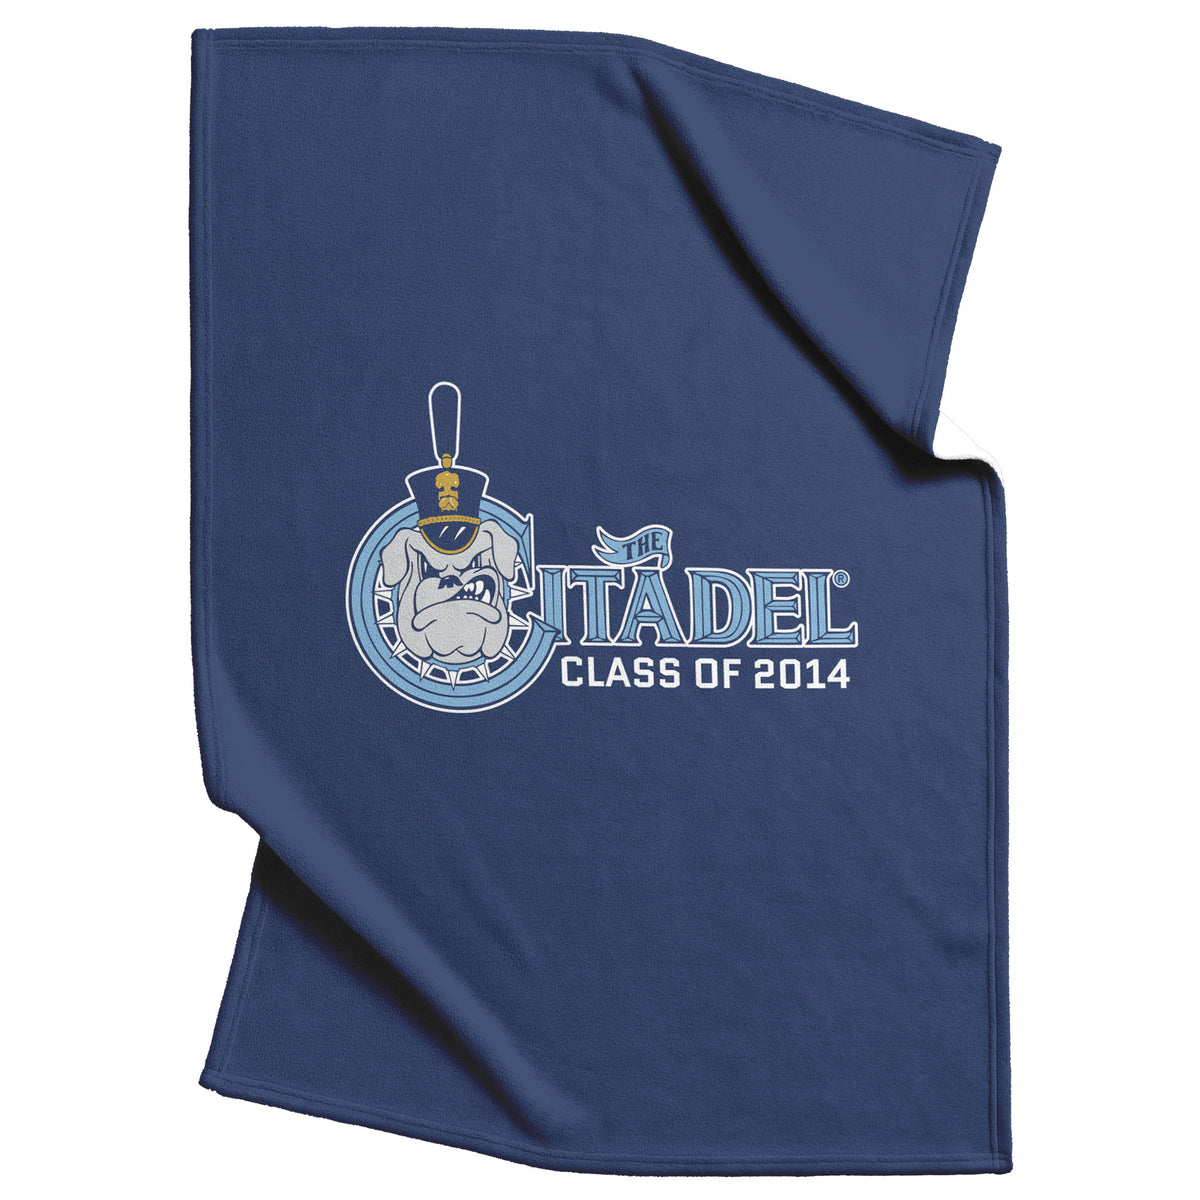 The Citadel Spike, Class of 2014 Blanket